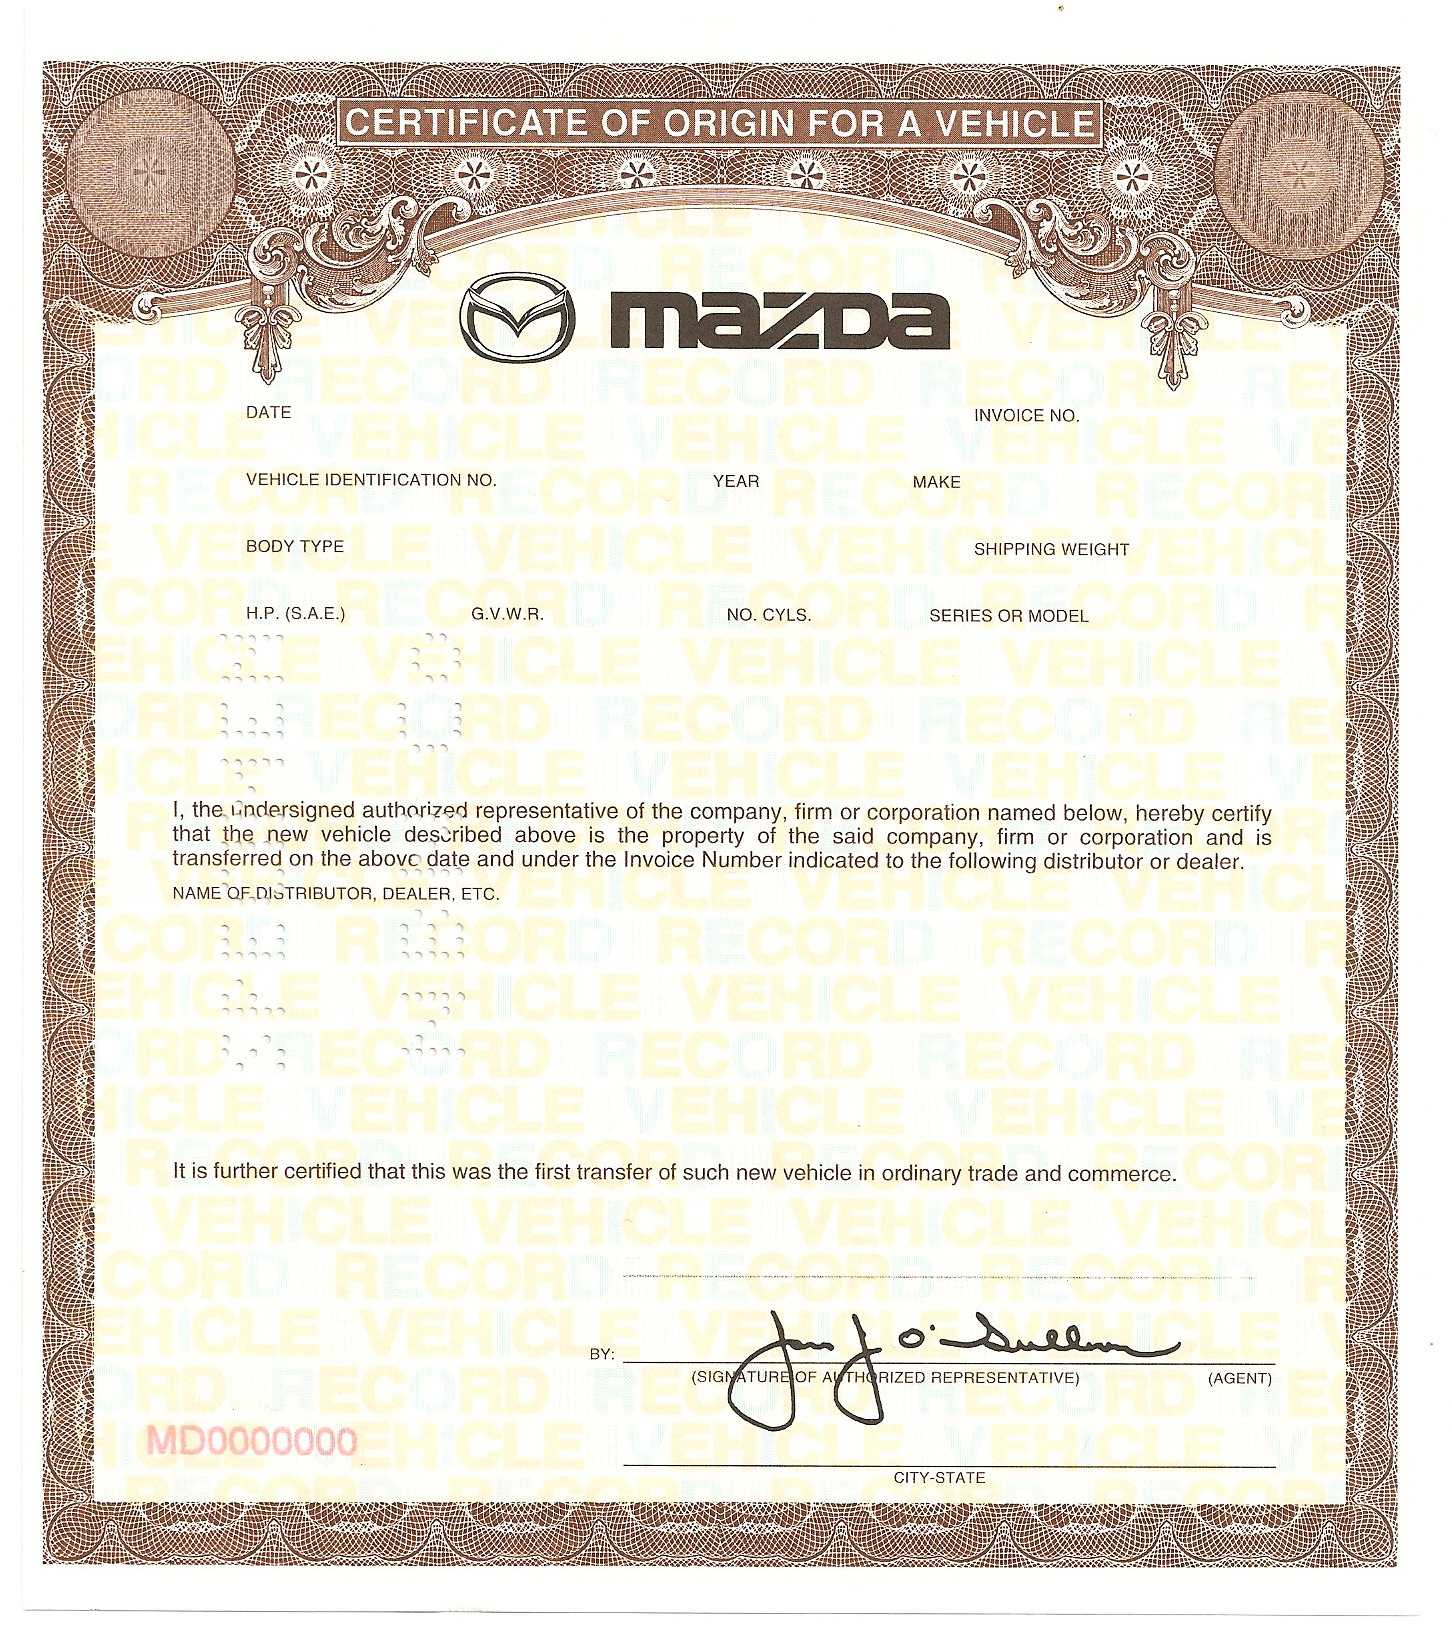 Certificate Of Origin For A Vehicle Template Regarding Certificate Of Origin For A Vehicle Template